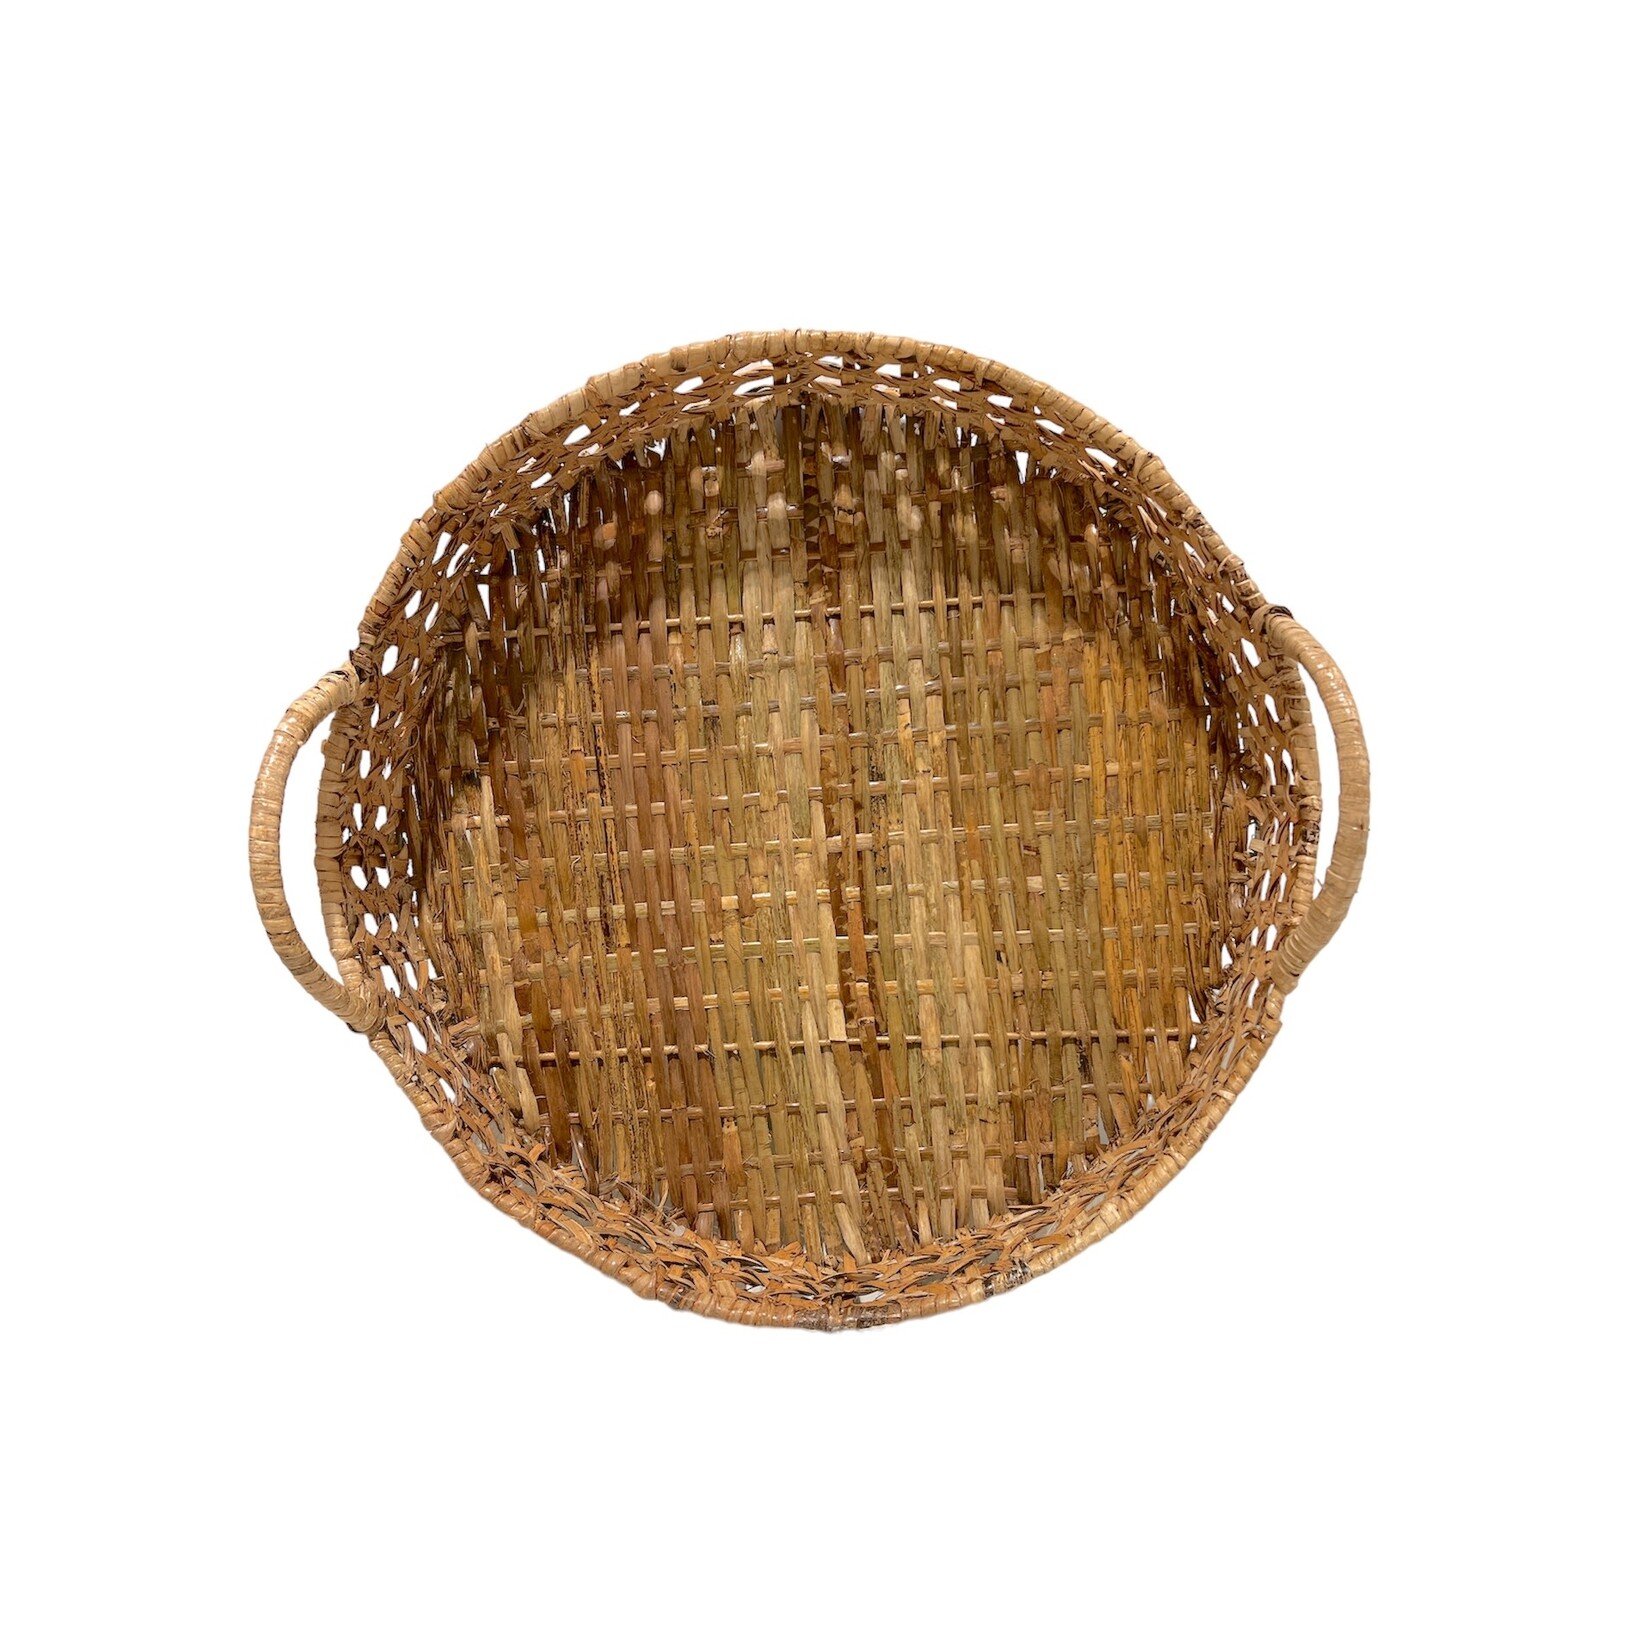 Outside The Box 18"  Natural Rattan Handwoven Tray With Handles